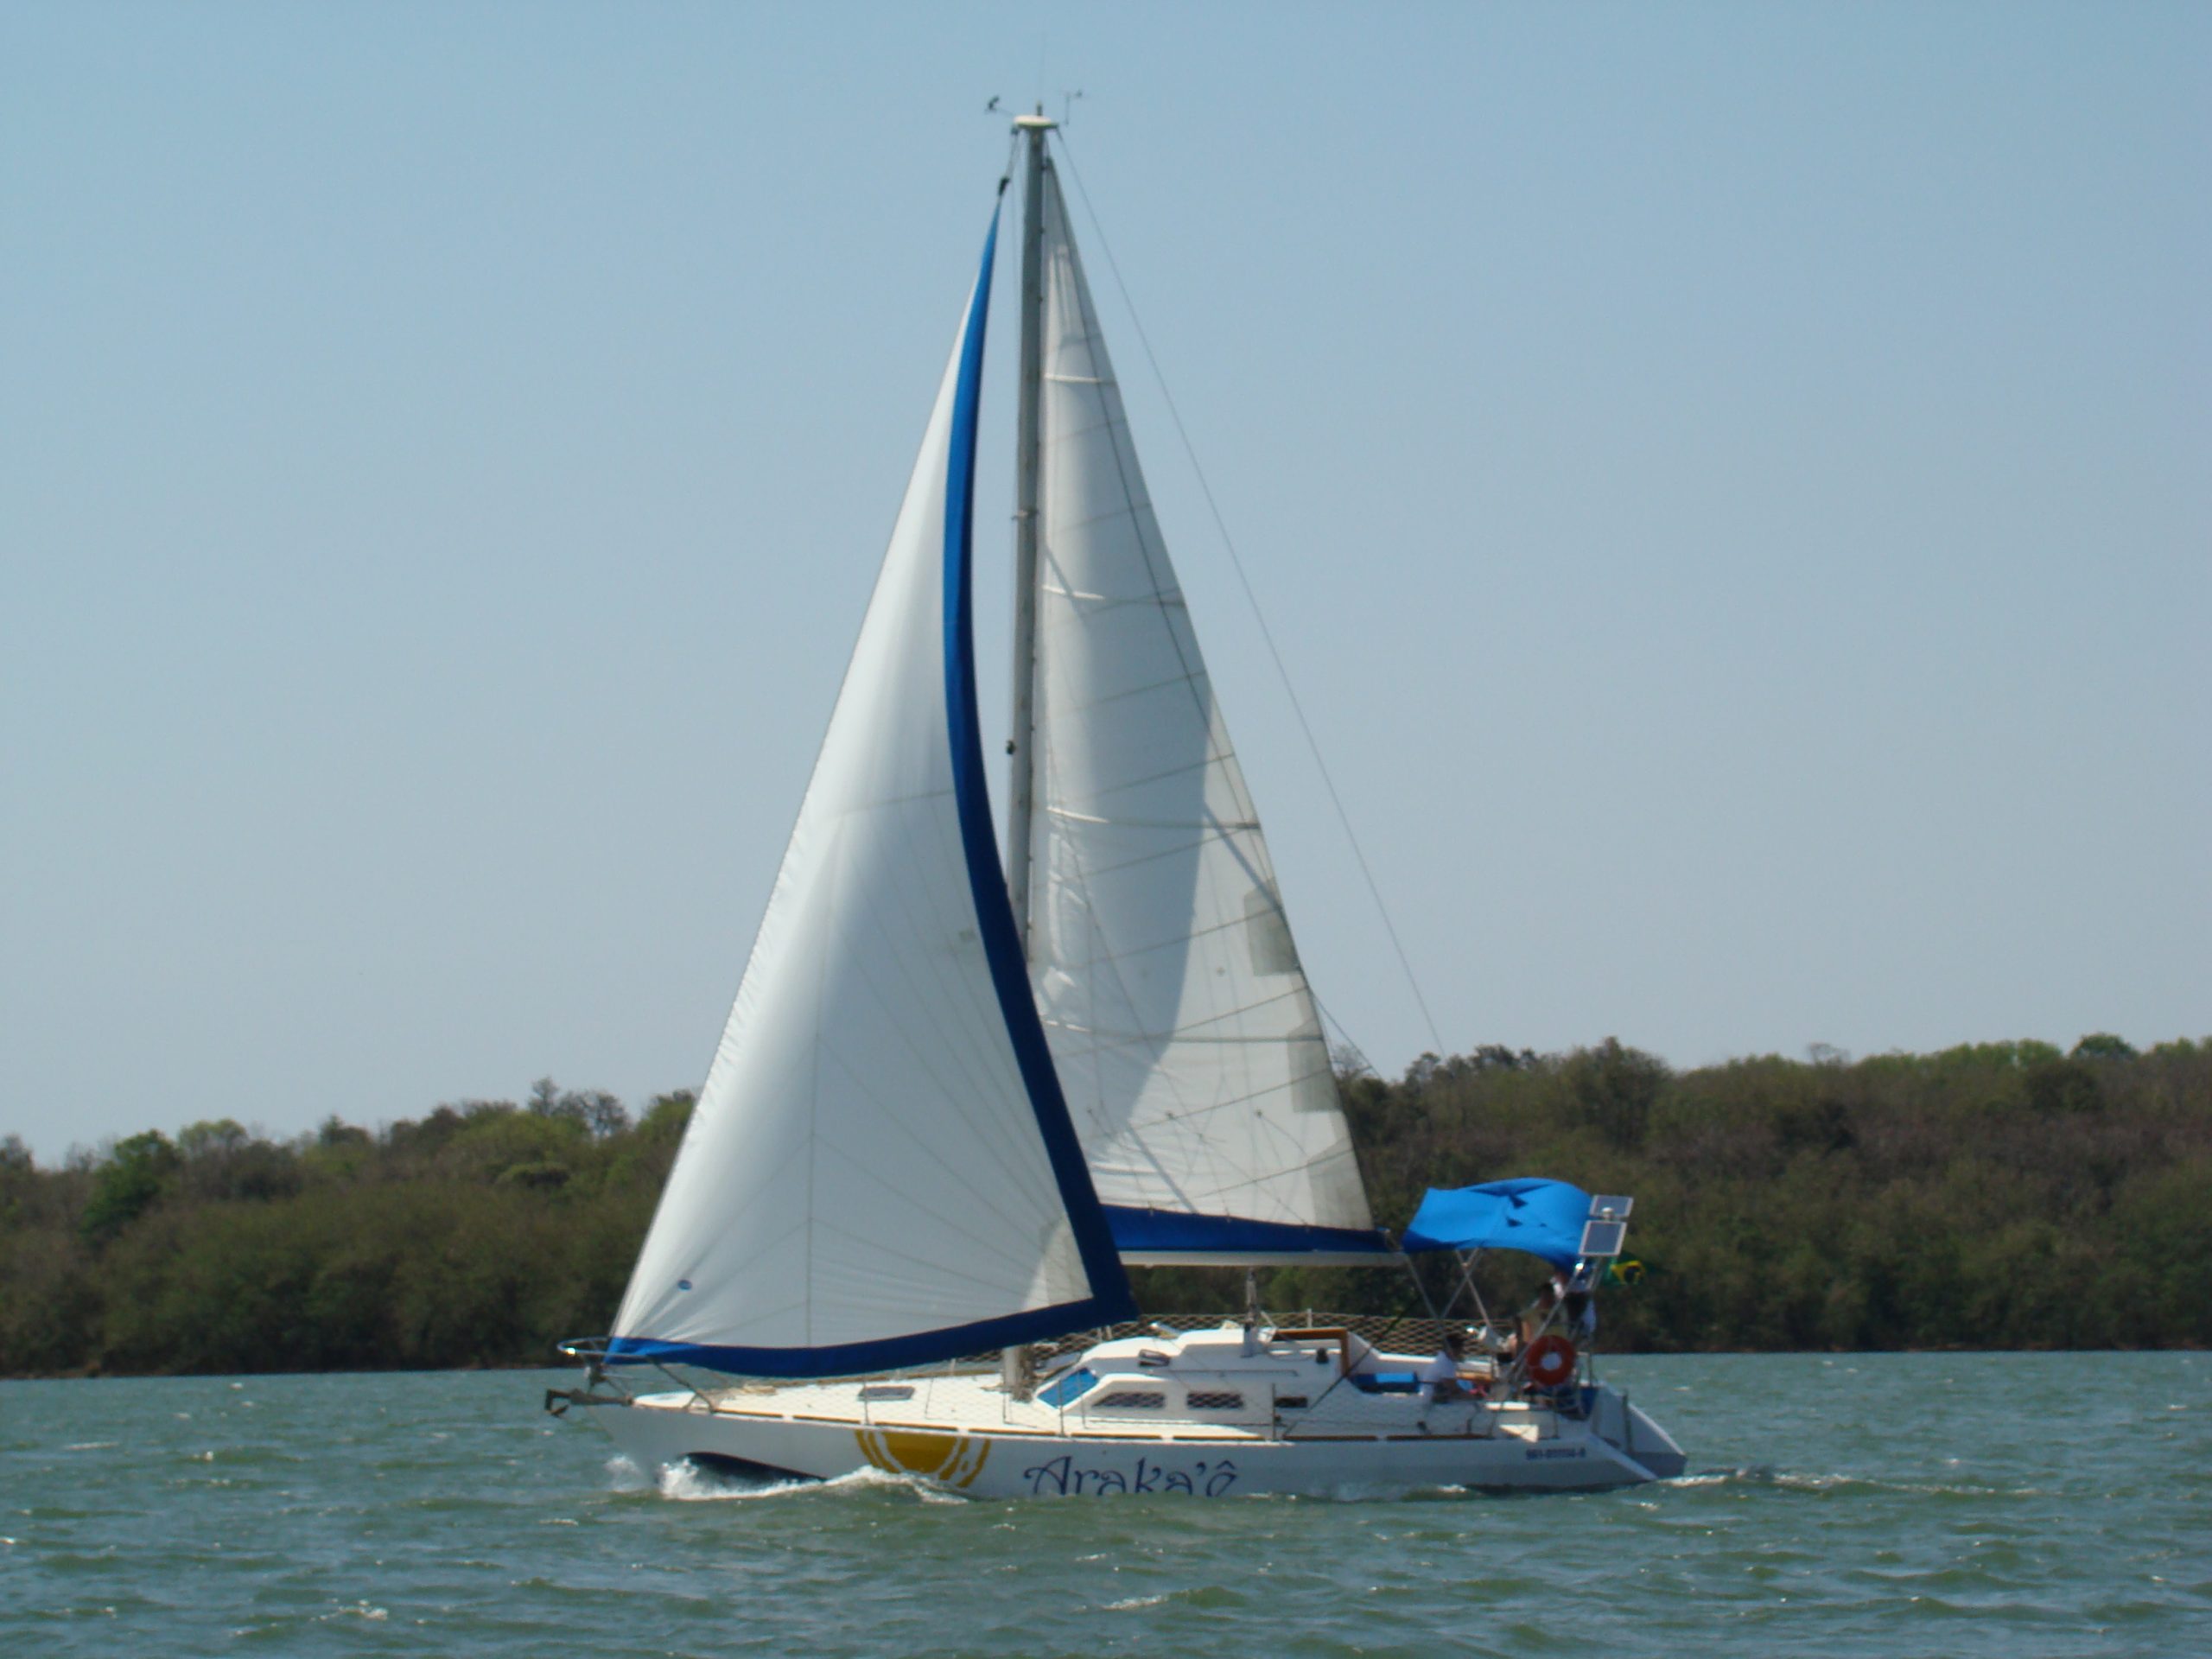 build a comfortable and stable sailboat